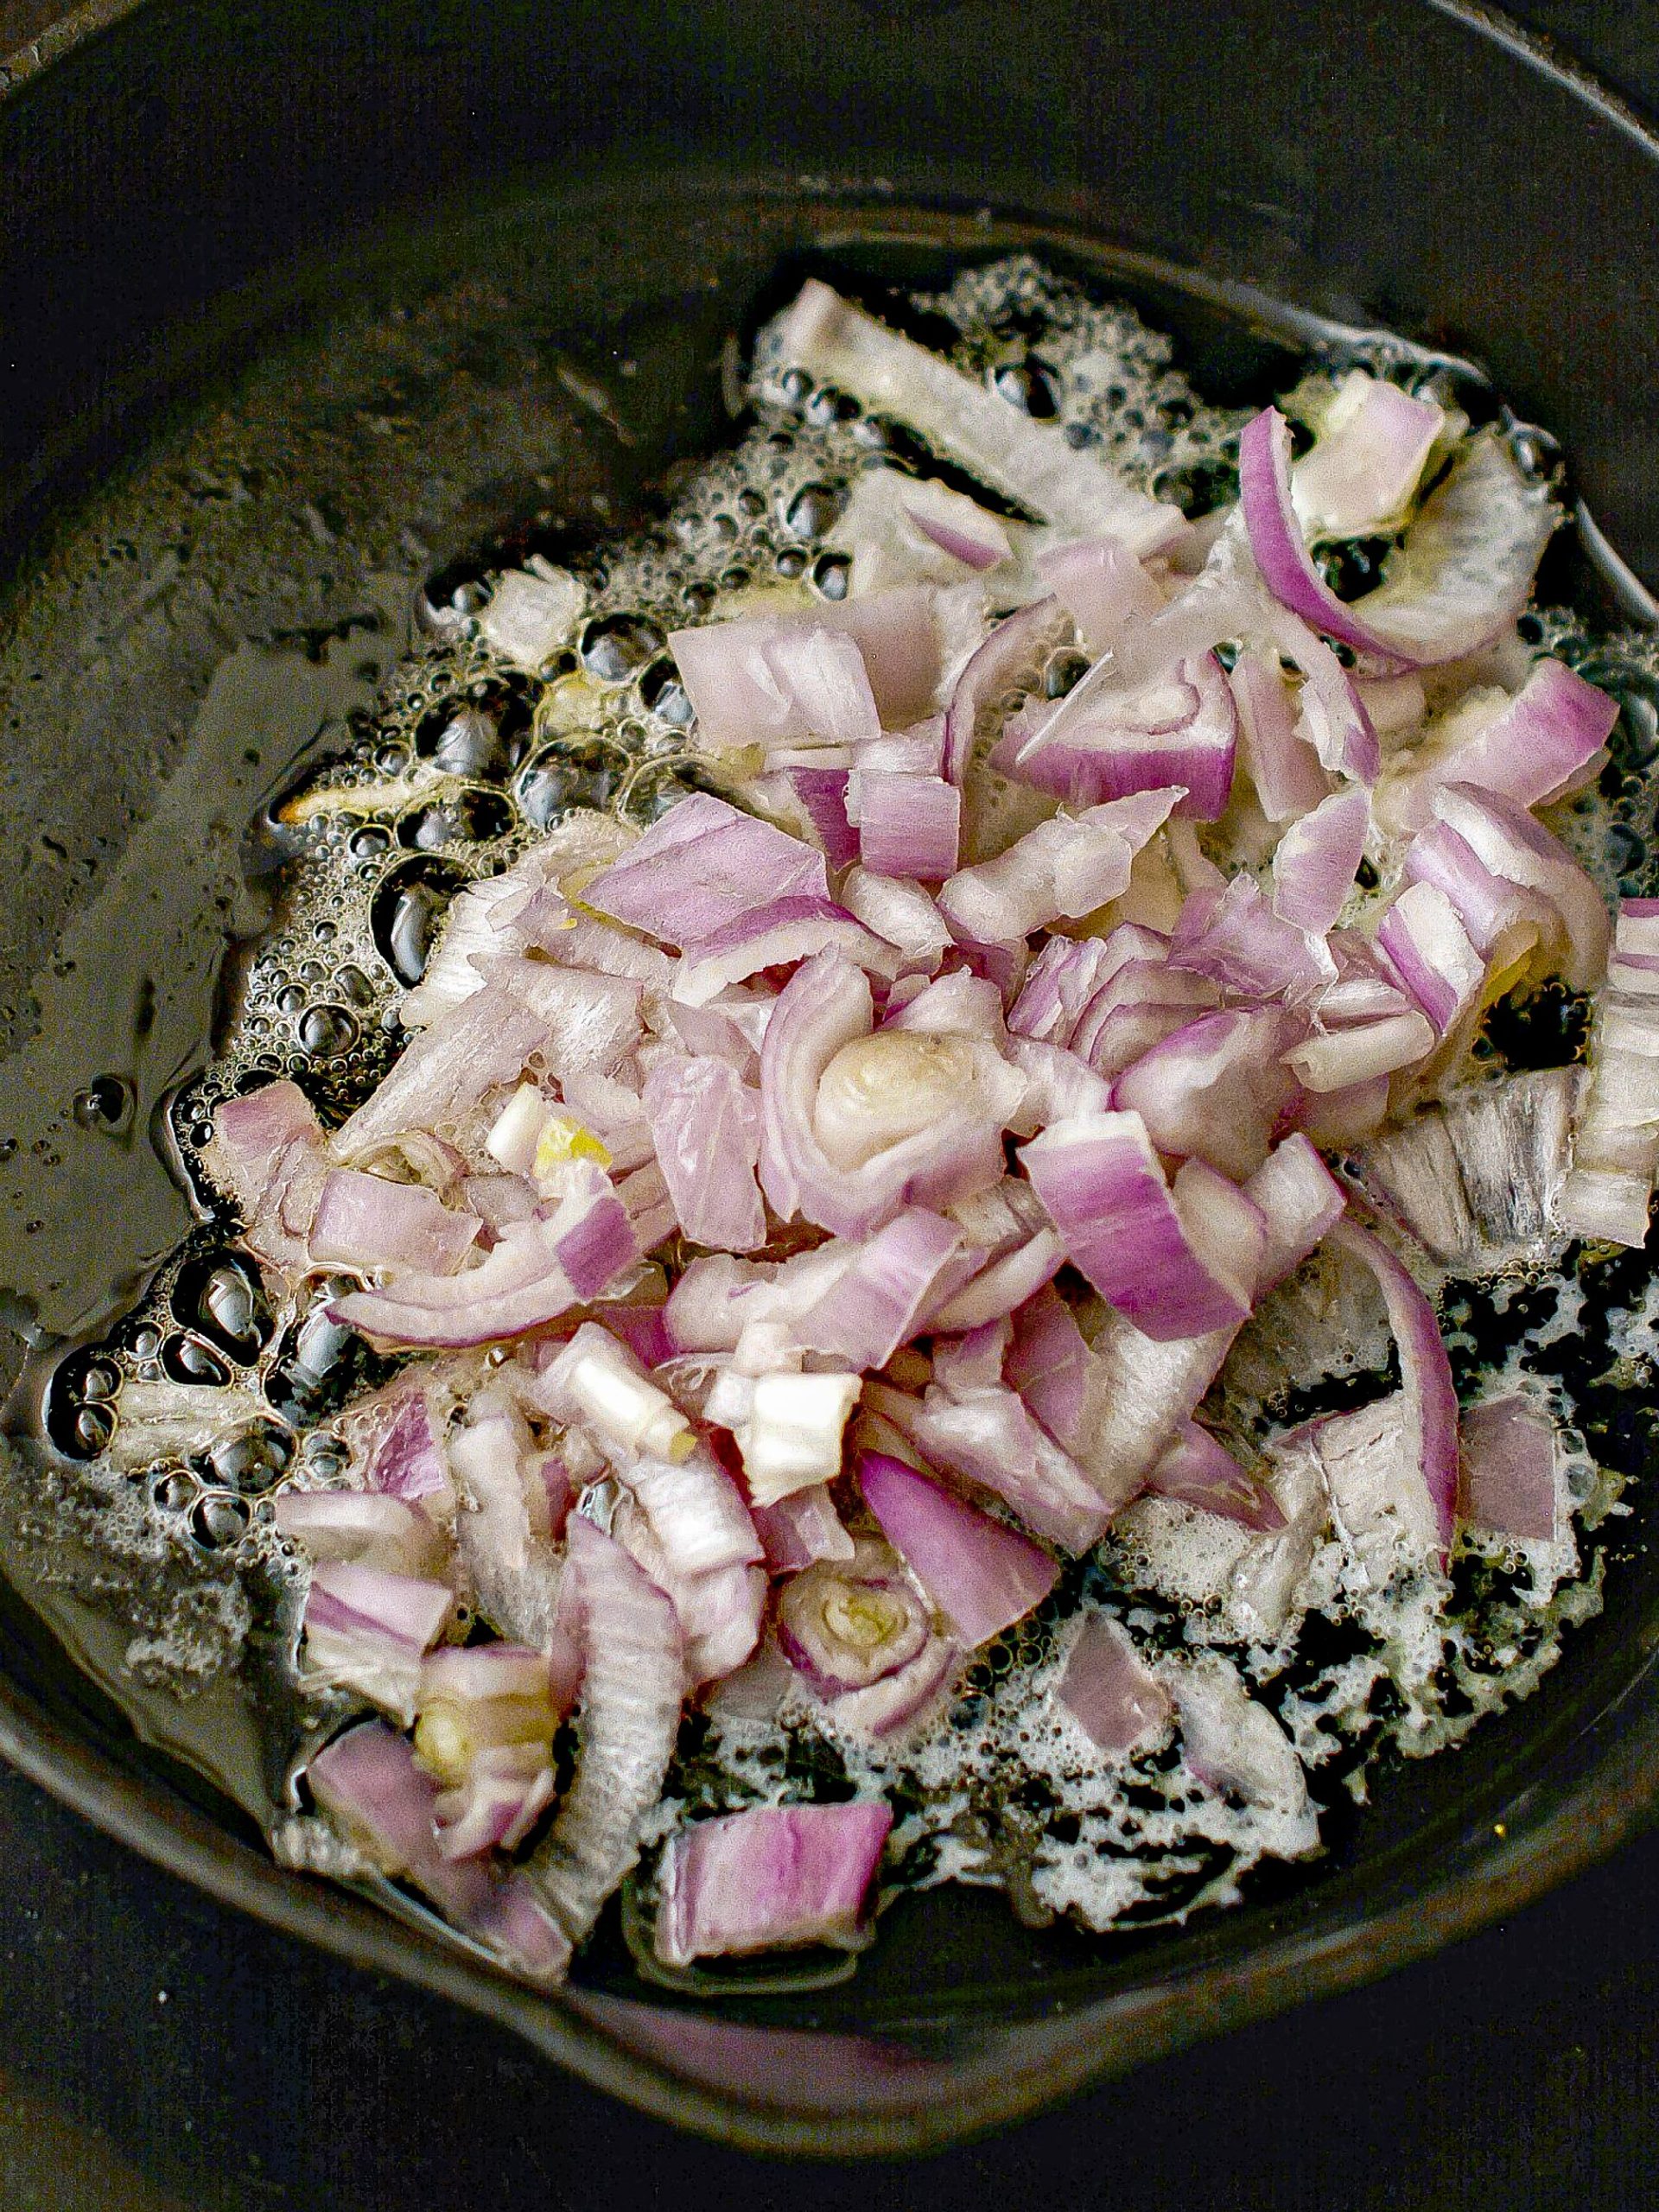 Place the shallots into the skillet and cook until they begin to soften and brown.